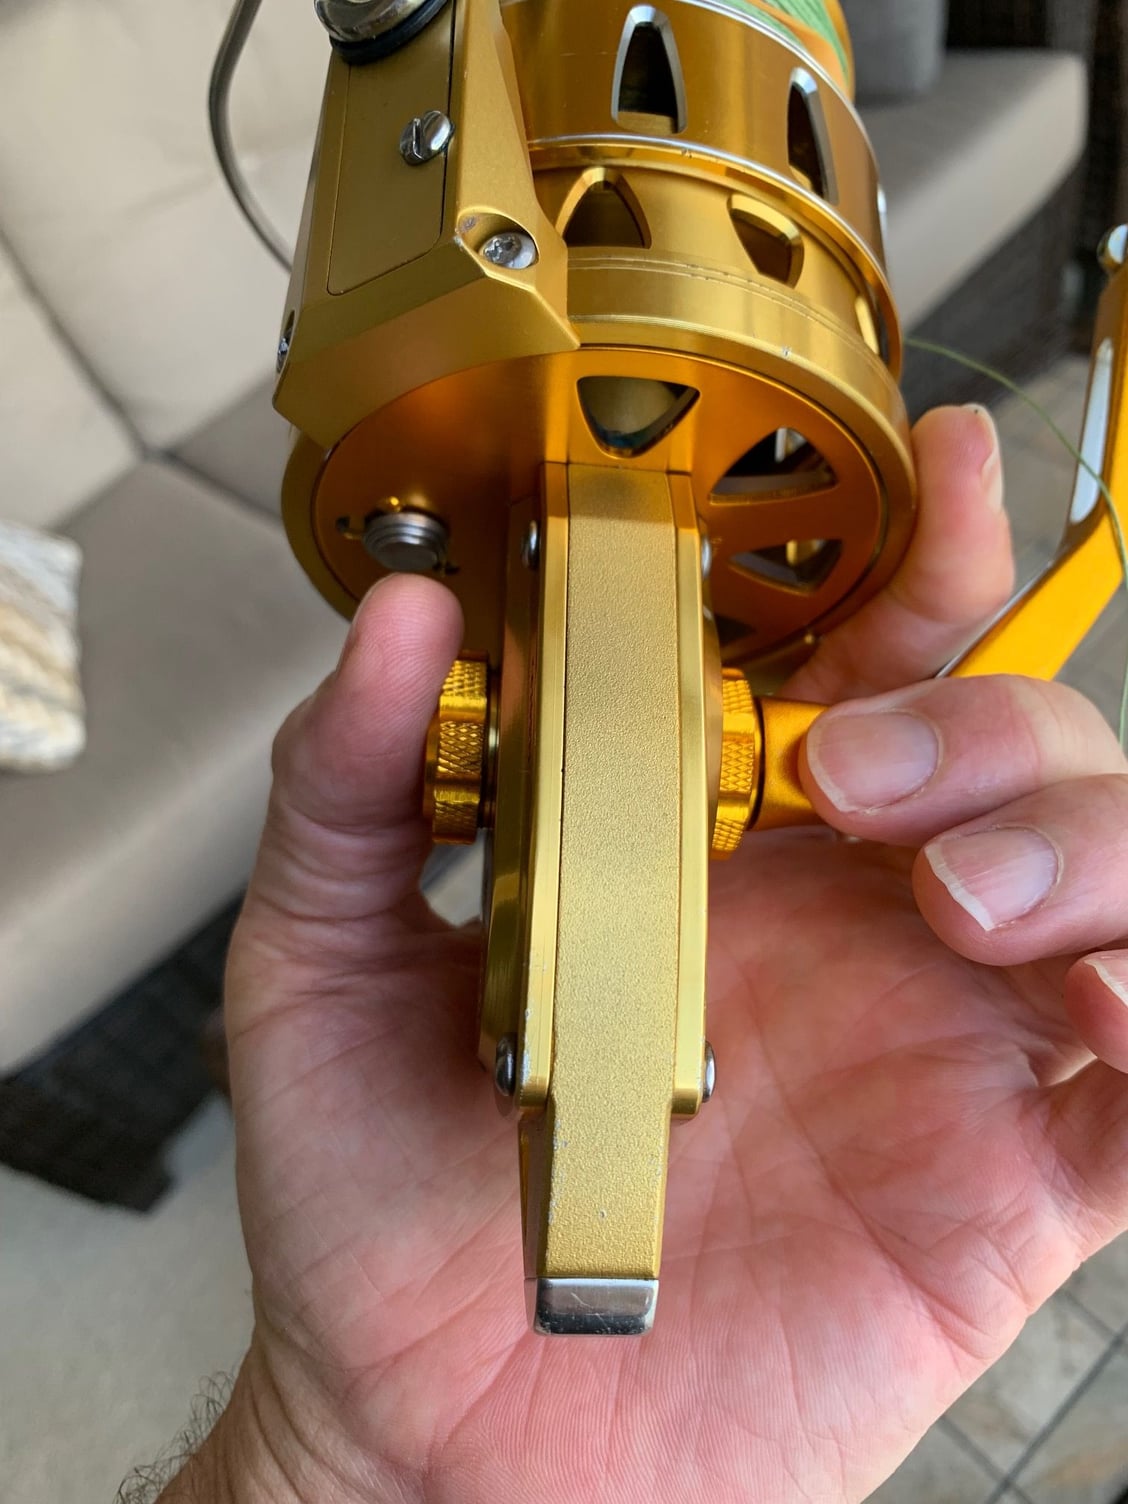 For Sale Torque Spinng Reels - The Hull Truth - Boating and Fishing Forum